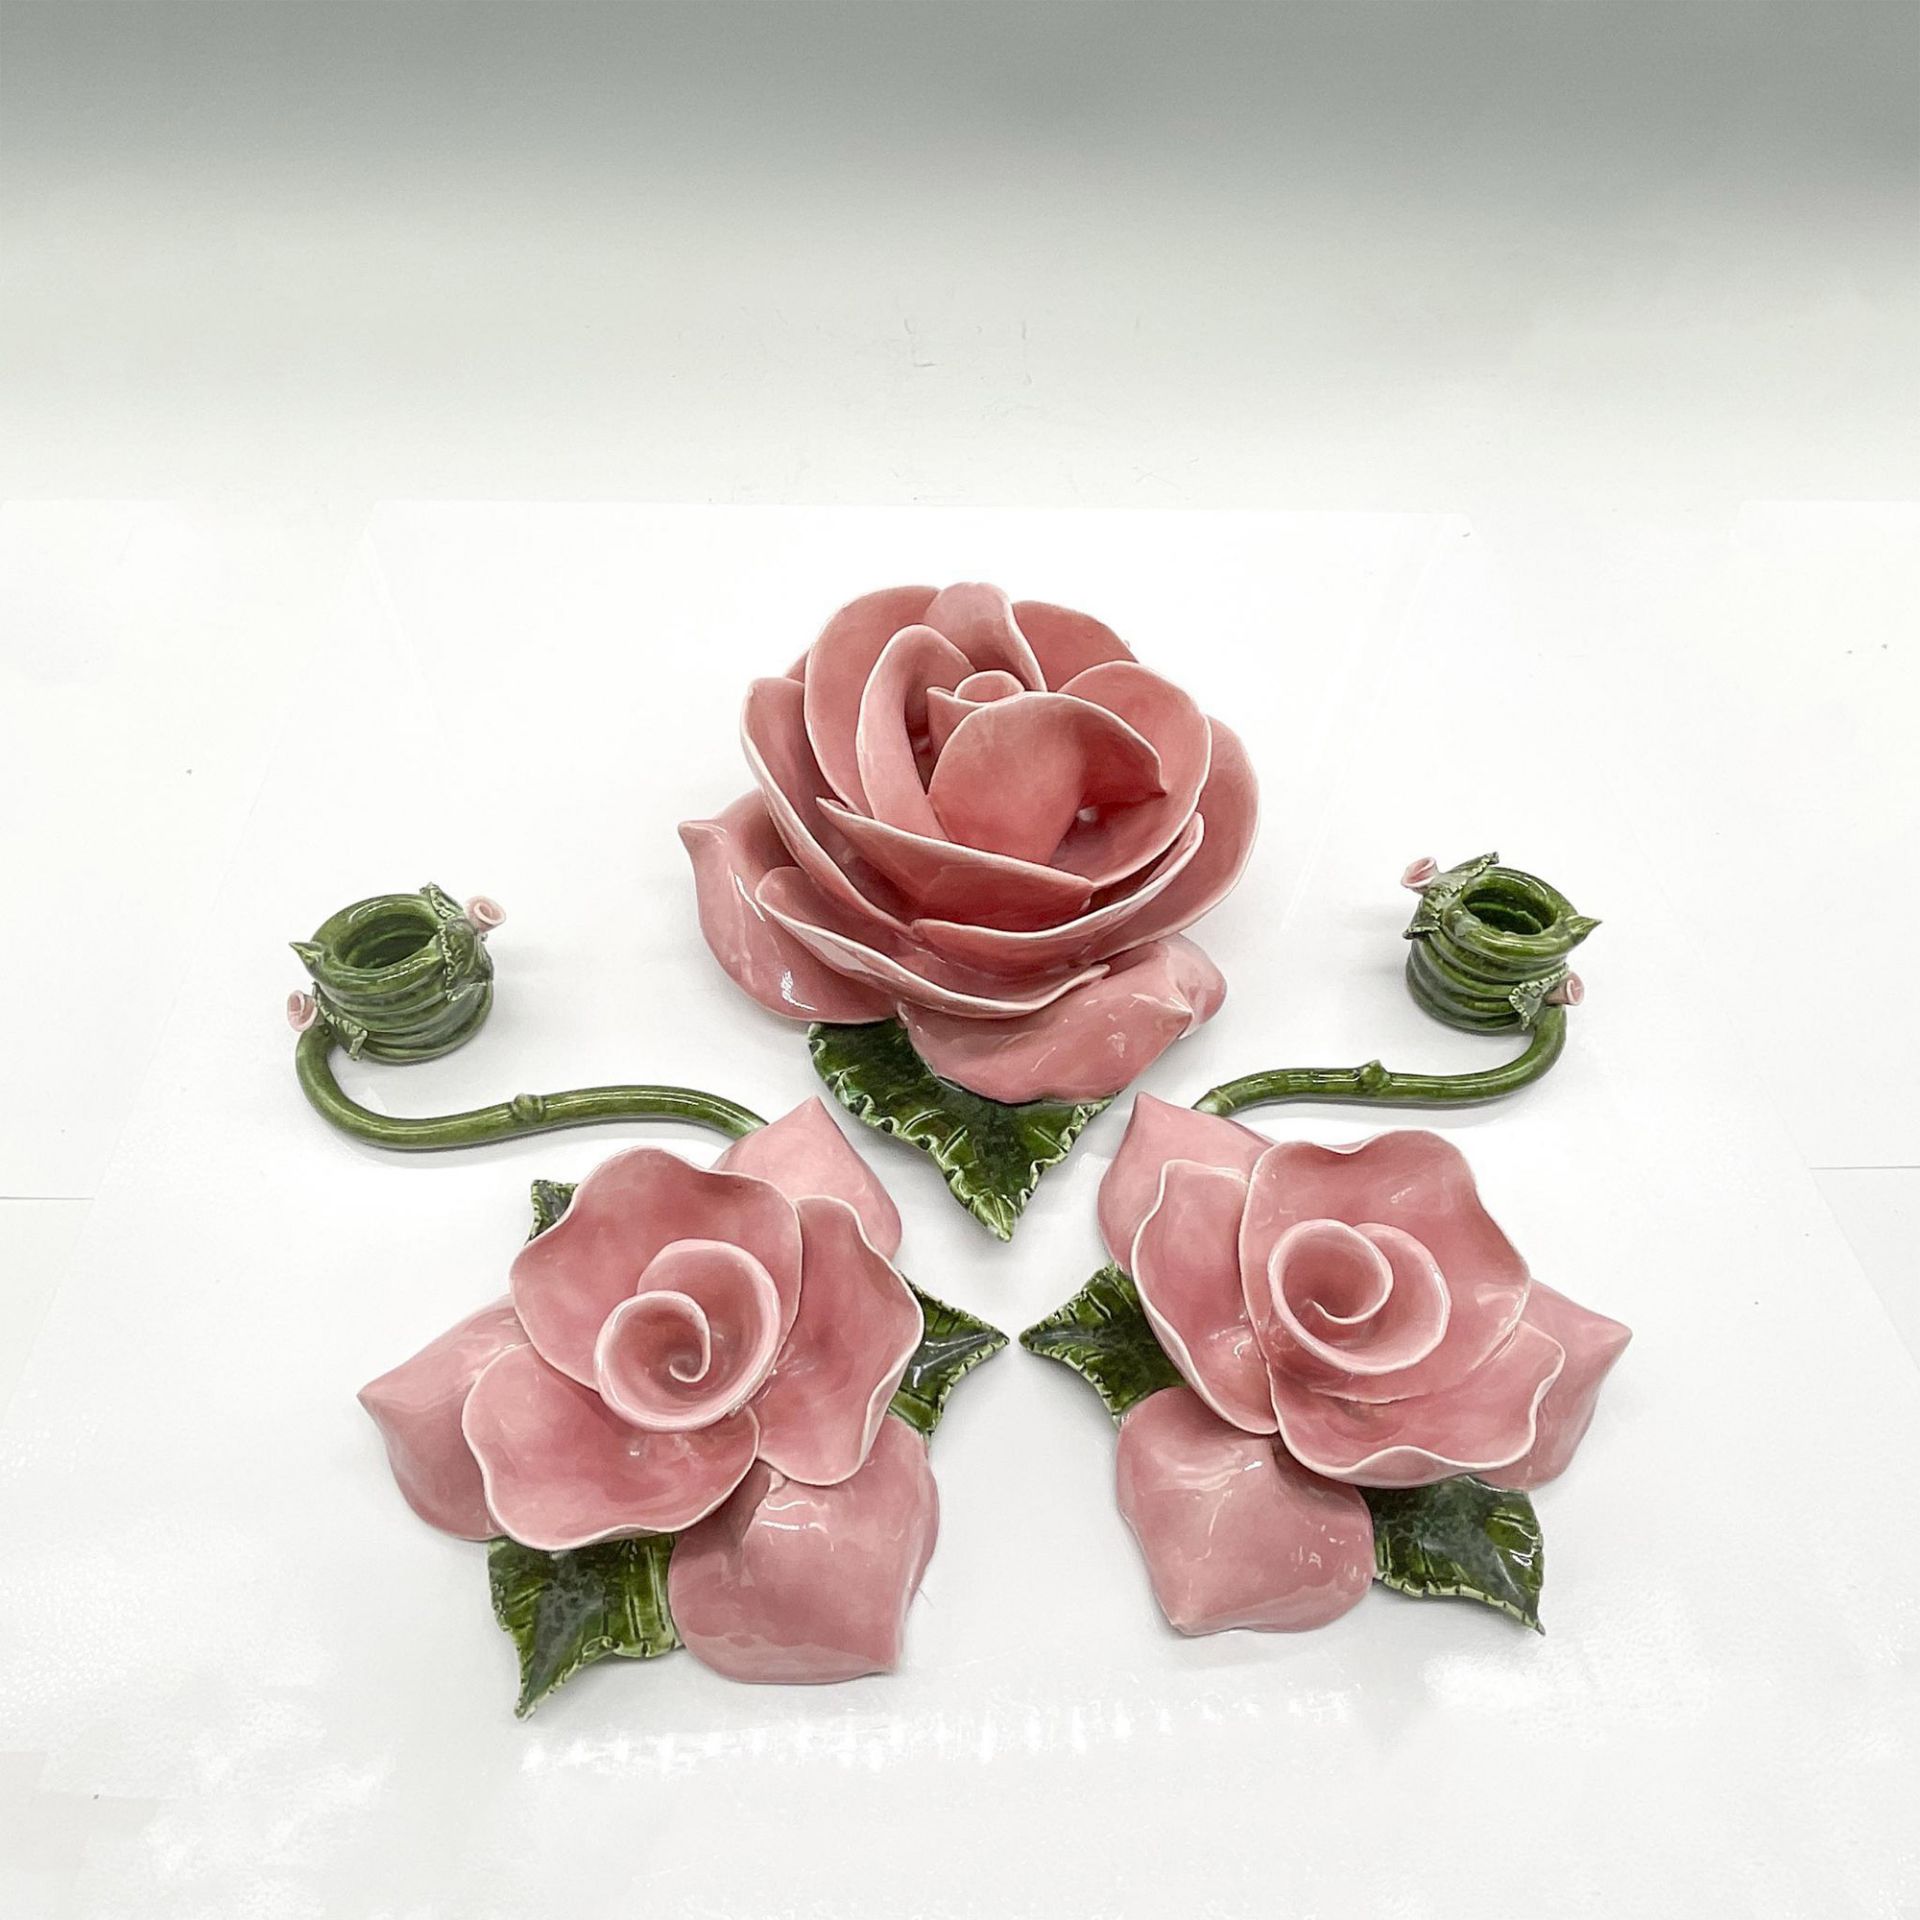 3pc Ceramic Rose Centerpiece and Candleholders - Image 2 of 3